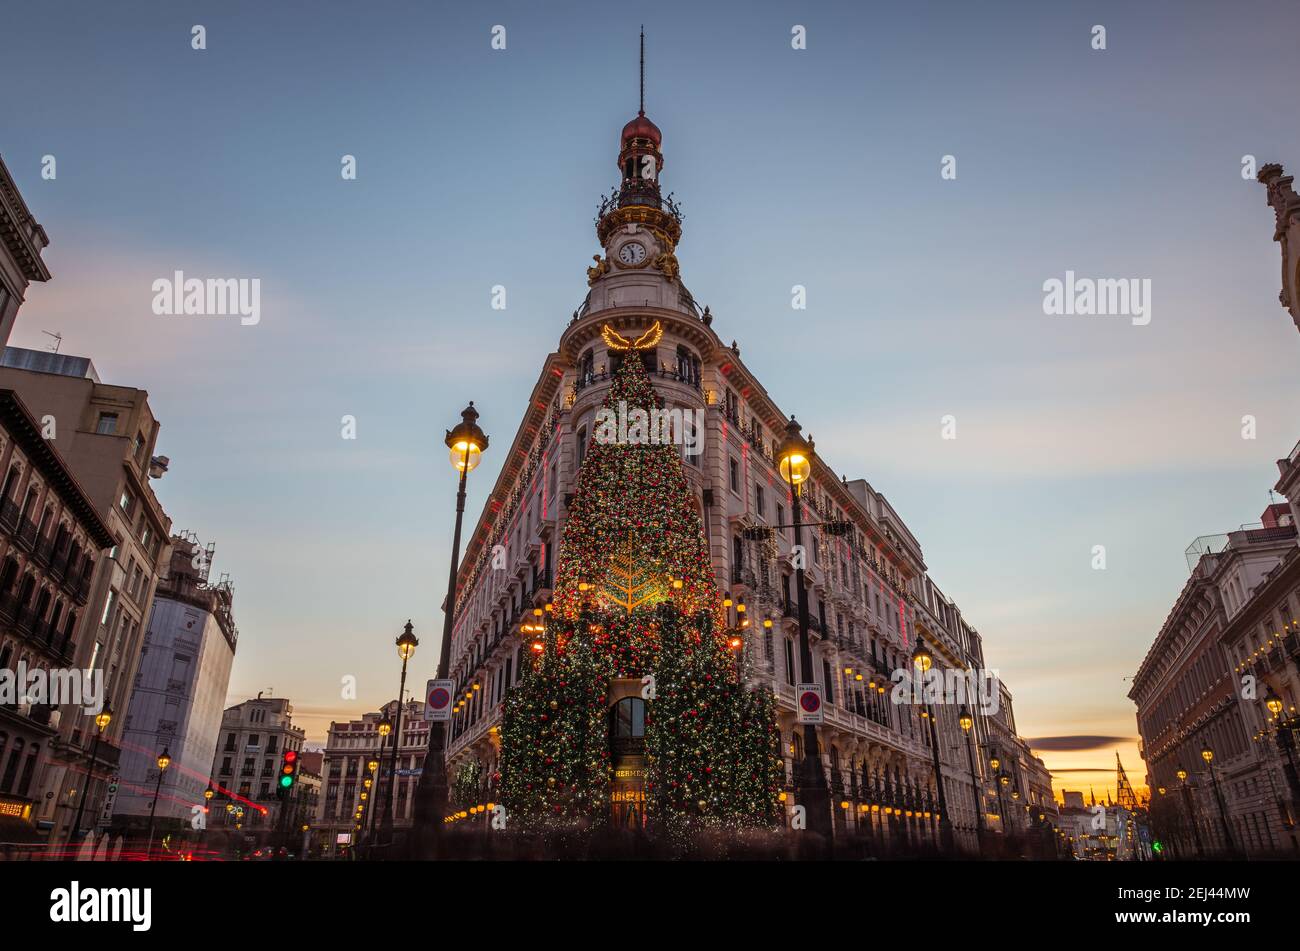 MADRID - DECEMBER 27, 2020: Wide-angle view of the recently renovated Centro Canalejas complex in Madrid, illuminated by the Christmas decorations at Stock Photo